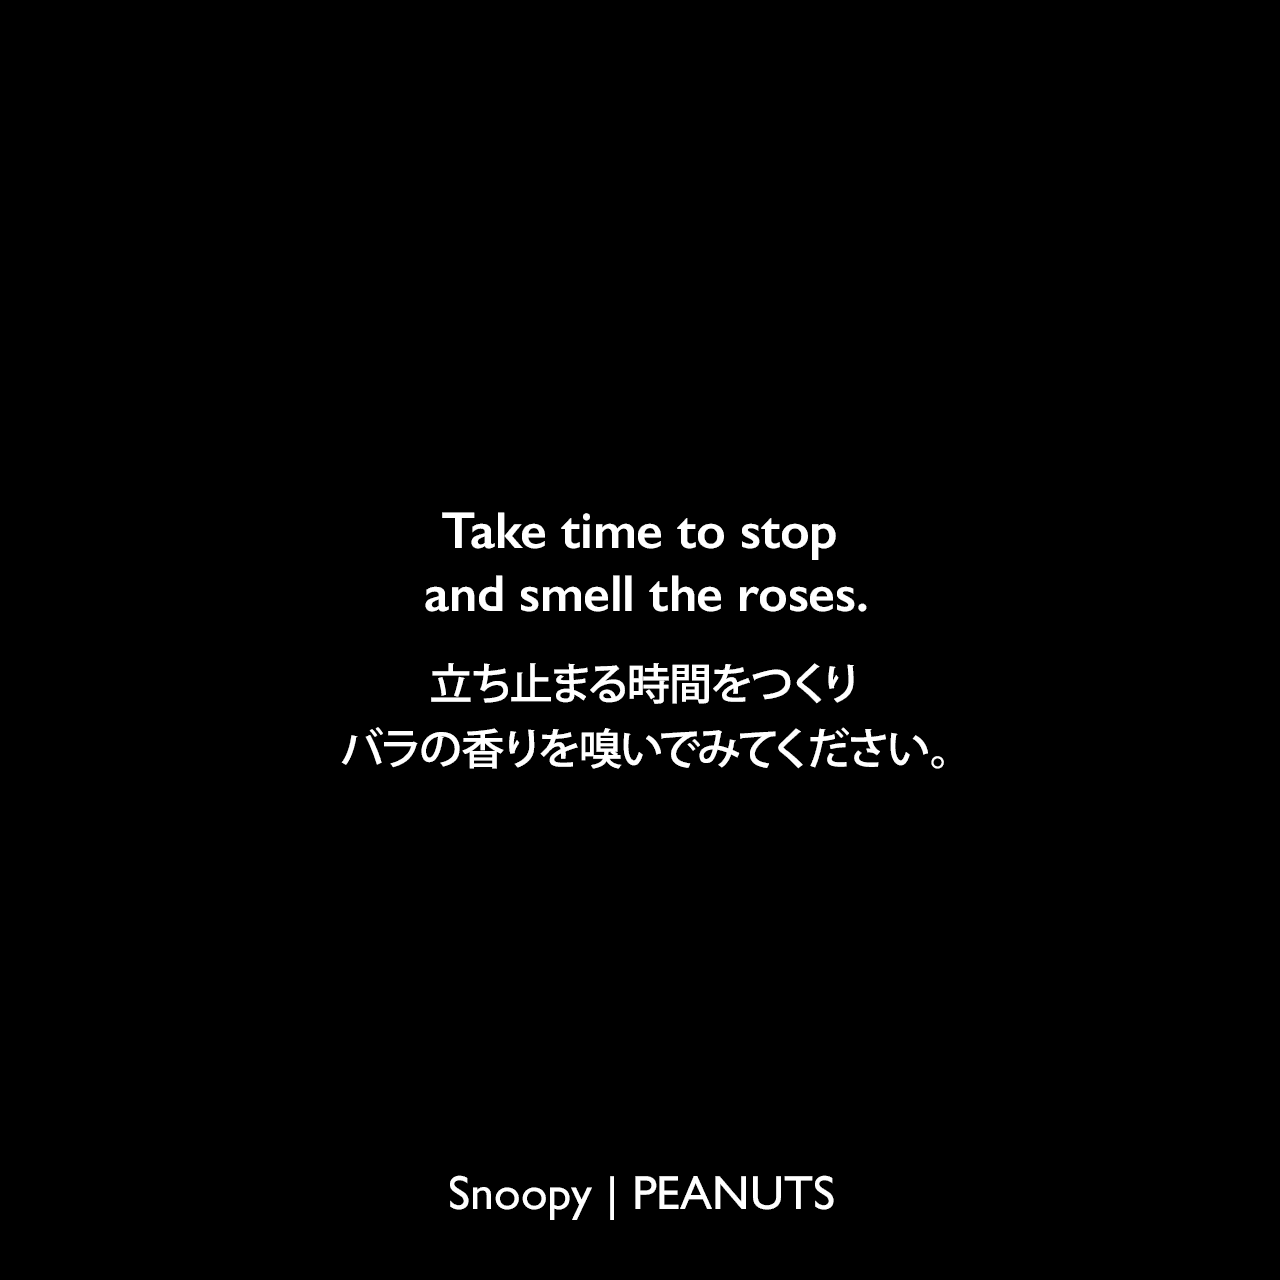 Take time to stop and smell the roses.立ち止まる時間をつくりバラの香りを嗅いでみてください。Charles Monroe Schulz